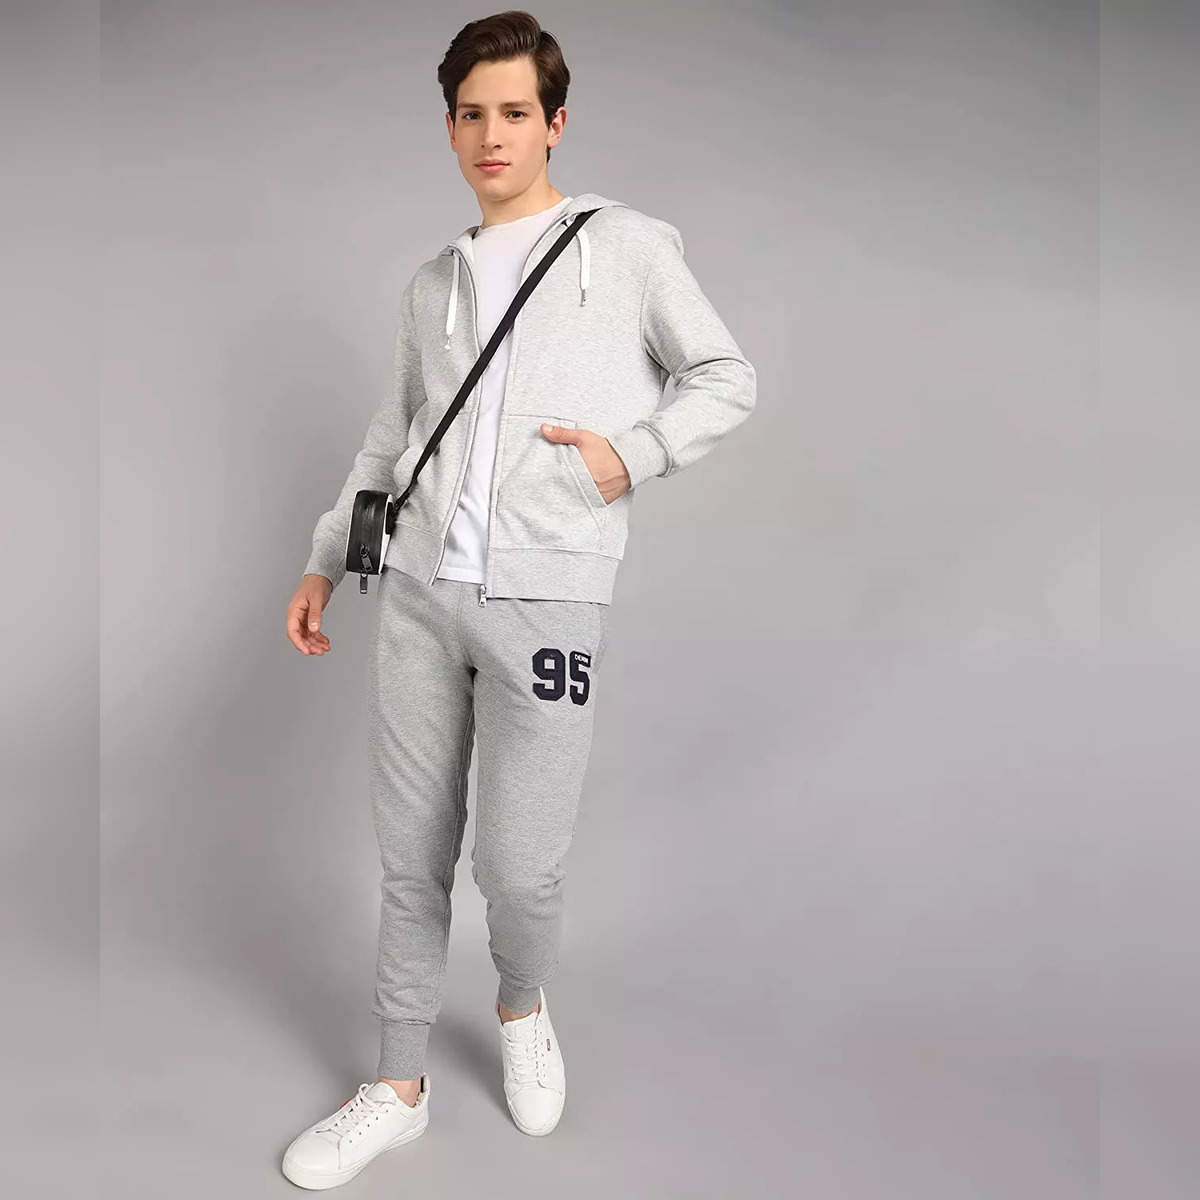 The Best Joggers and Pants For Skinny Boys